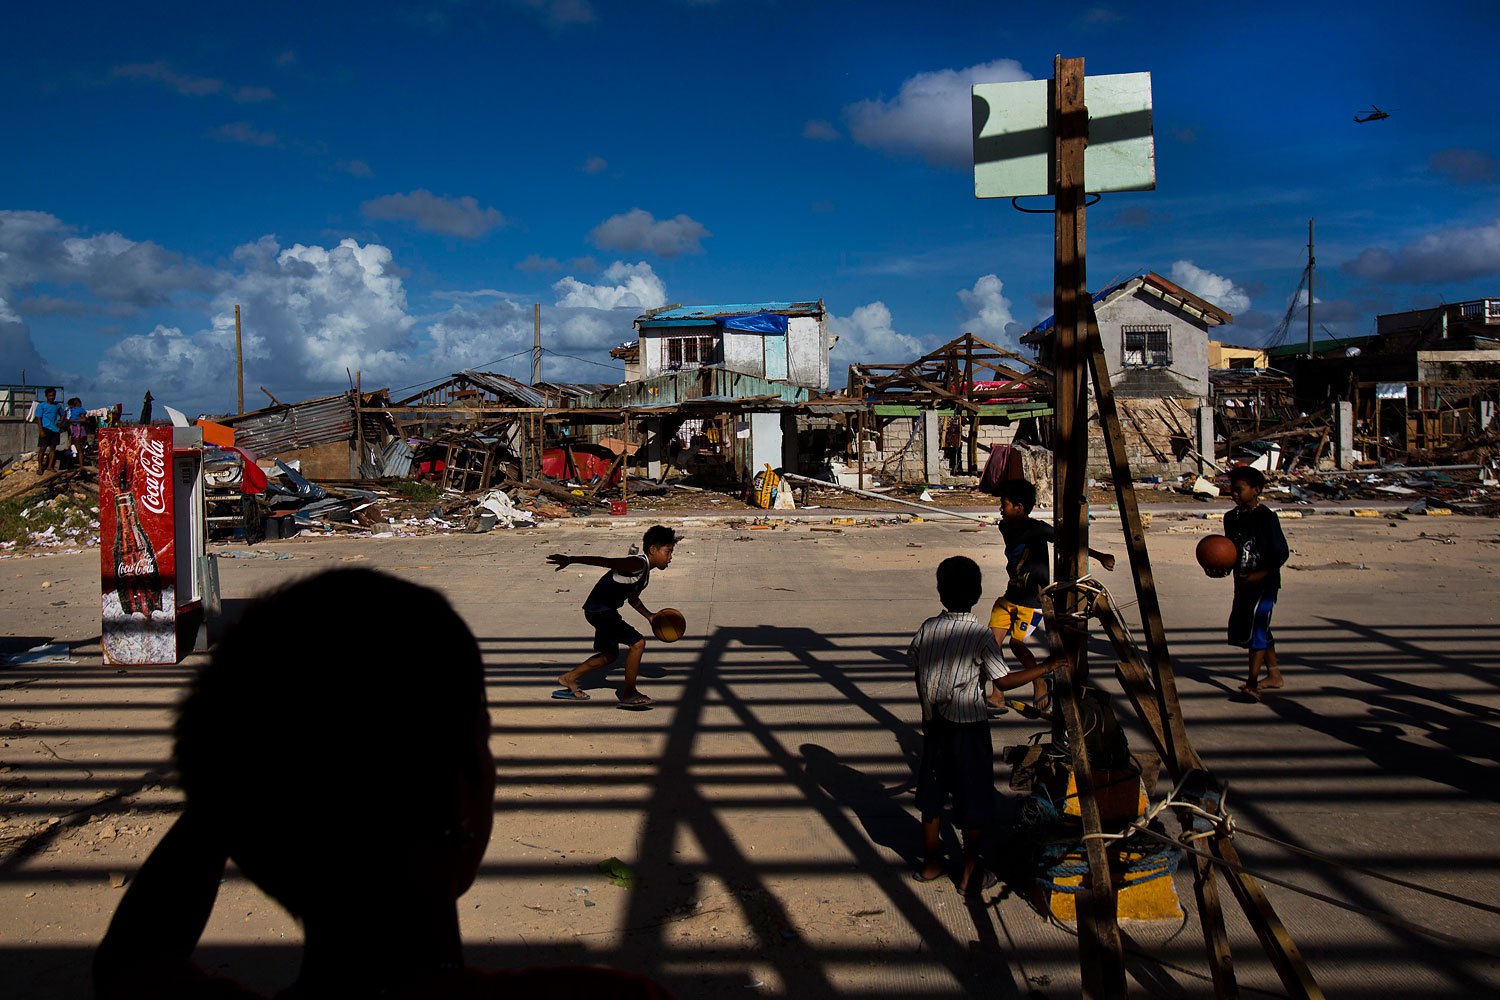 Typhoon Haiyan survivors play basketball at the destroyed port in the town of Guiuan, Philippines on November 15, 2013.